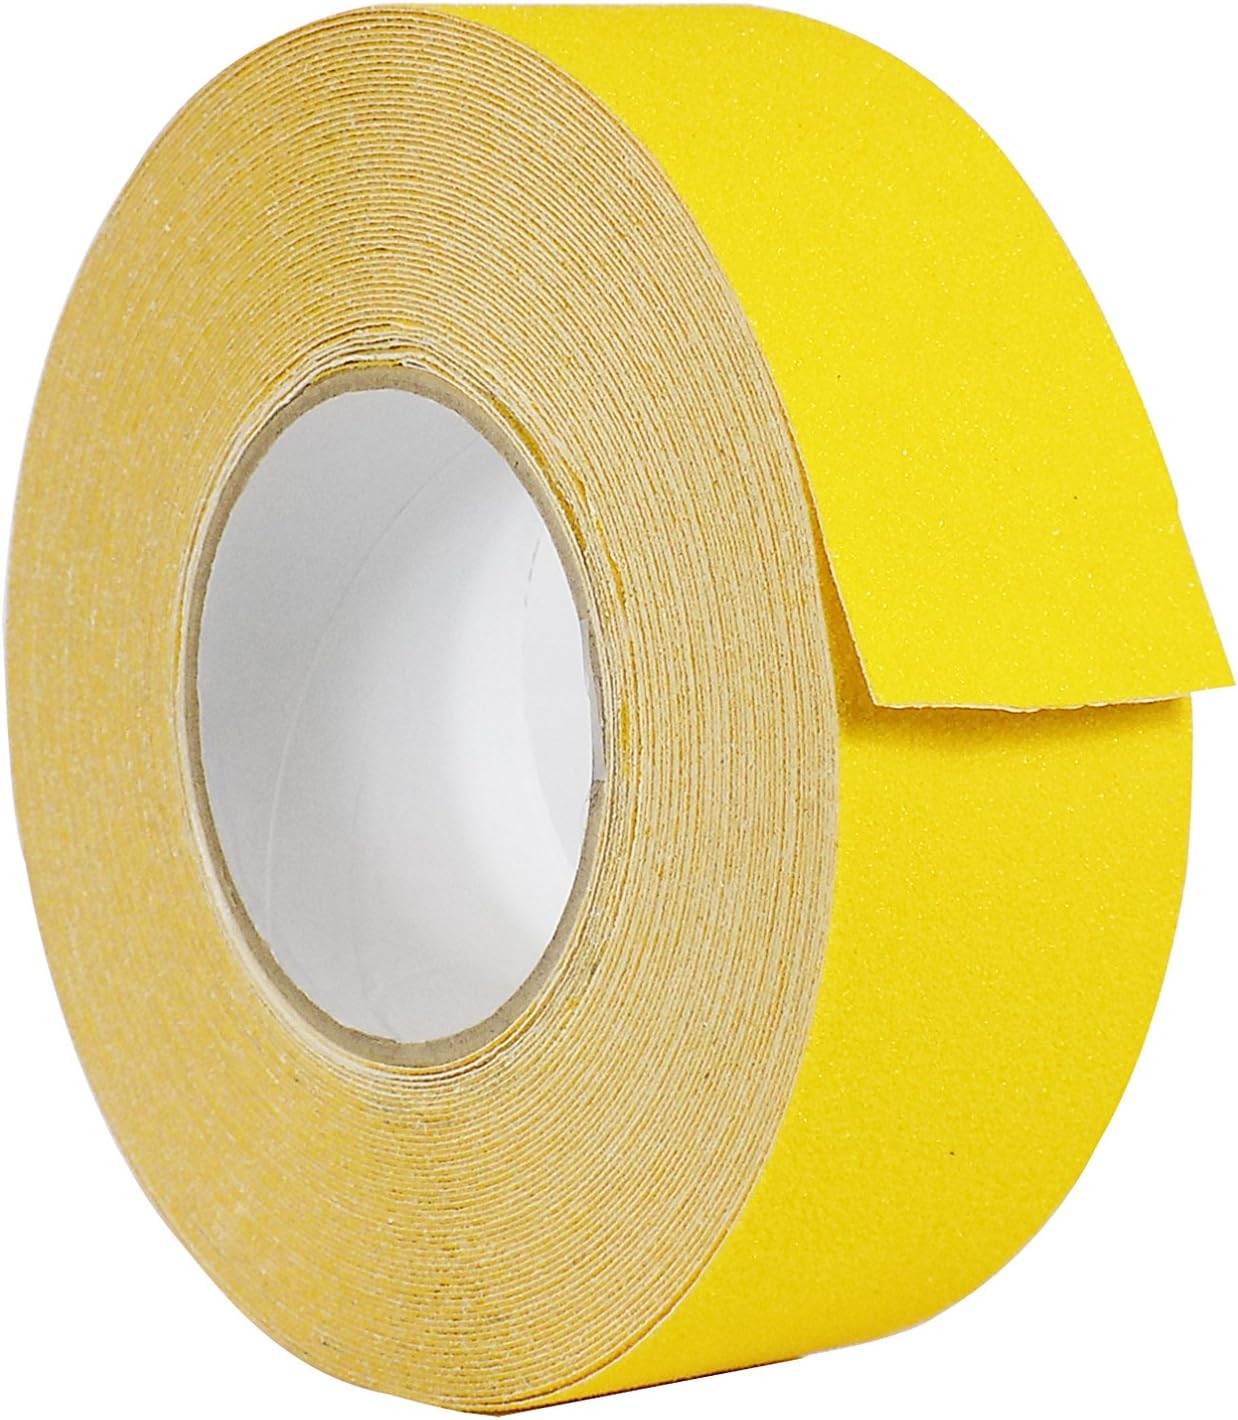 Tape Providers WOD ASTC32 Heavy Duty Anti Slip Tape, Yellow - 2 inch x 60 ft. Non Skid Treads Weather Proof Indoor/Outdoor Traction Tape for N